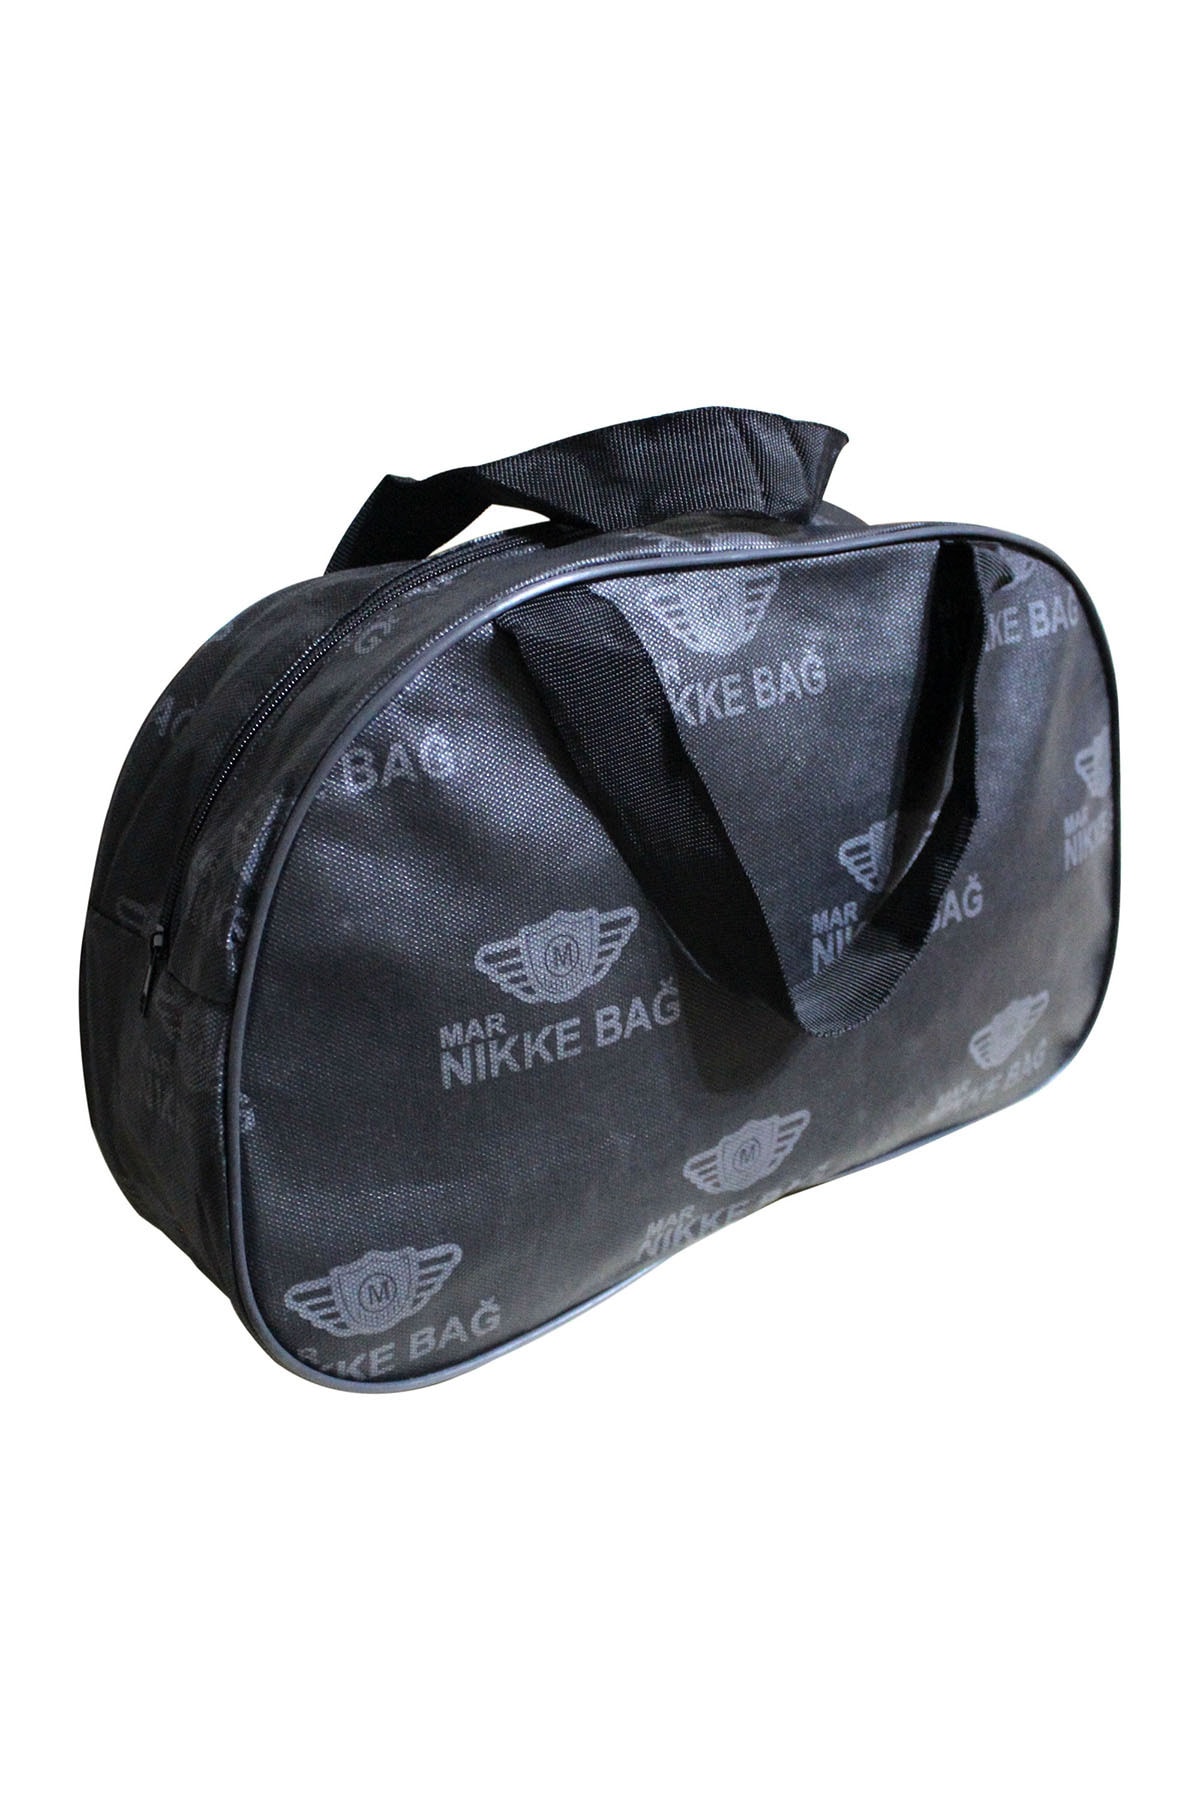 UniBlack Sports Bag, Solid, Economic, Convenient, Large, Quality Zipper, for Daily Use Writing Printed